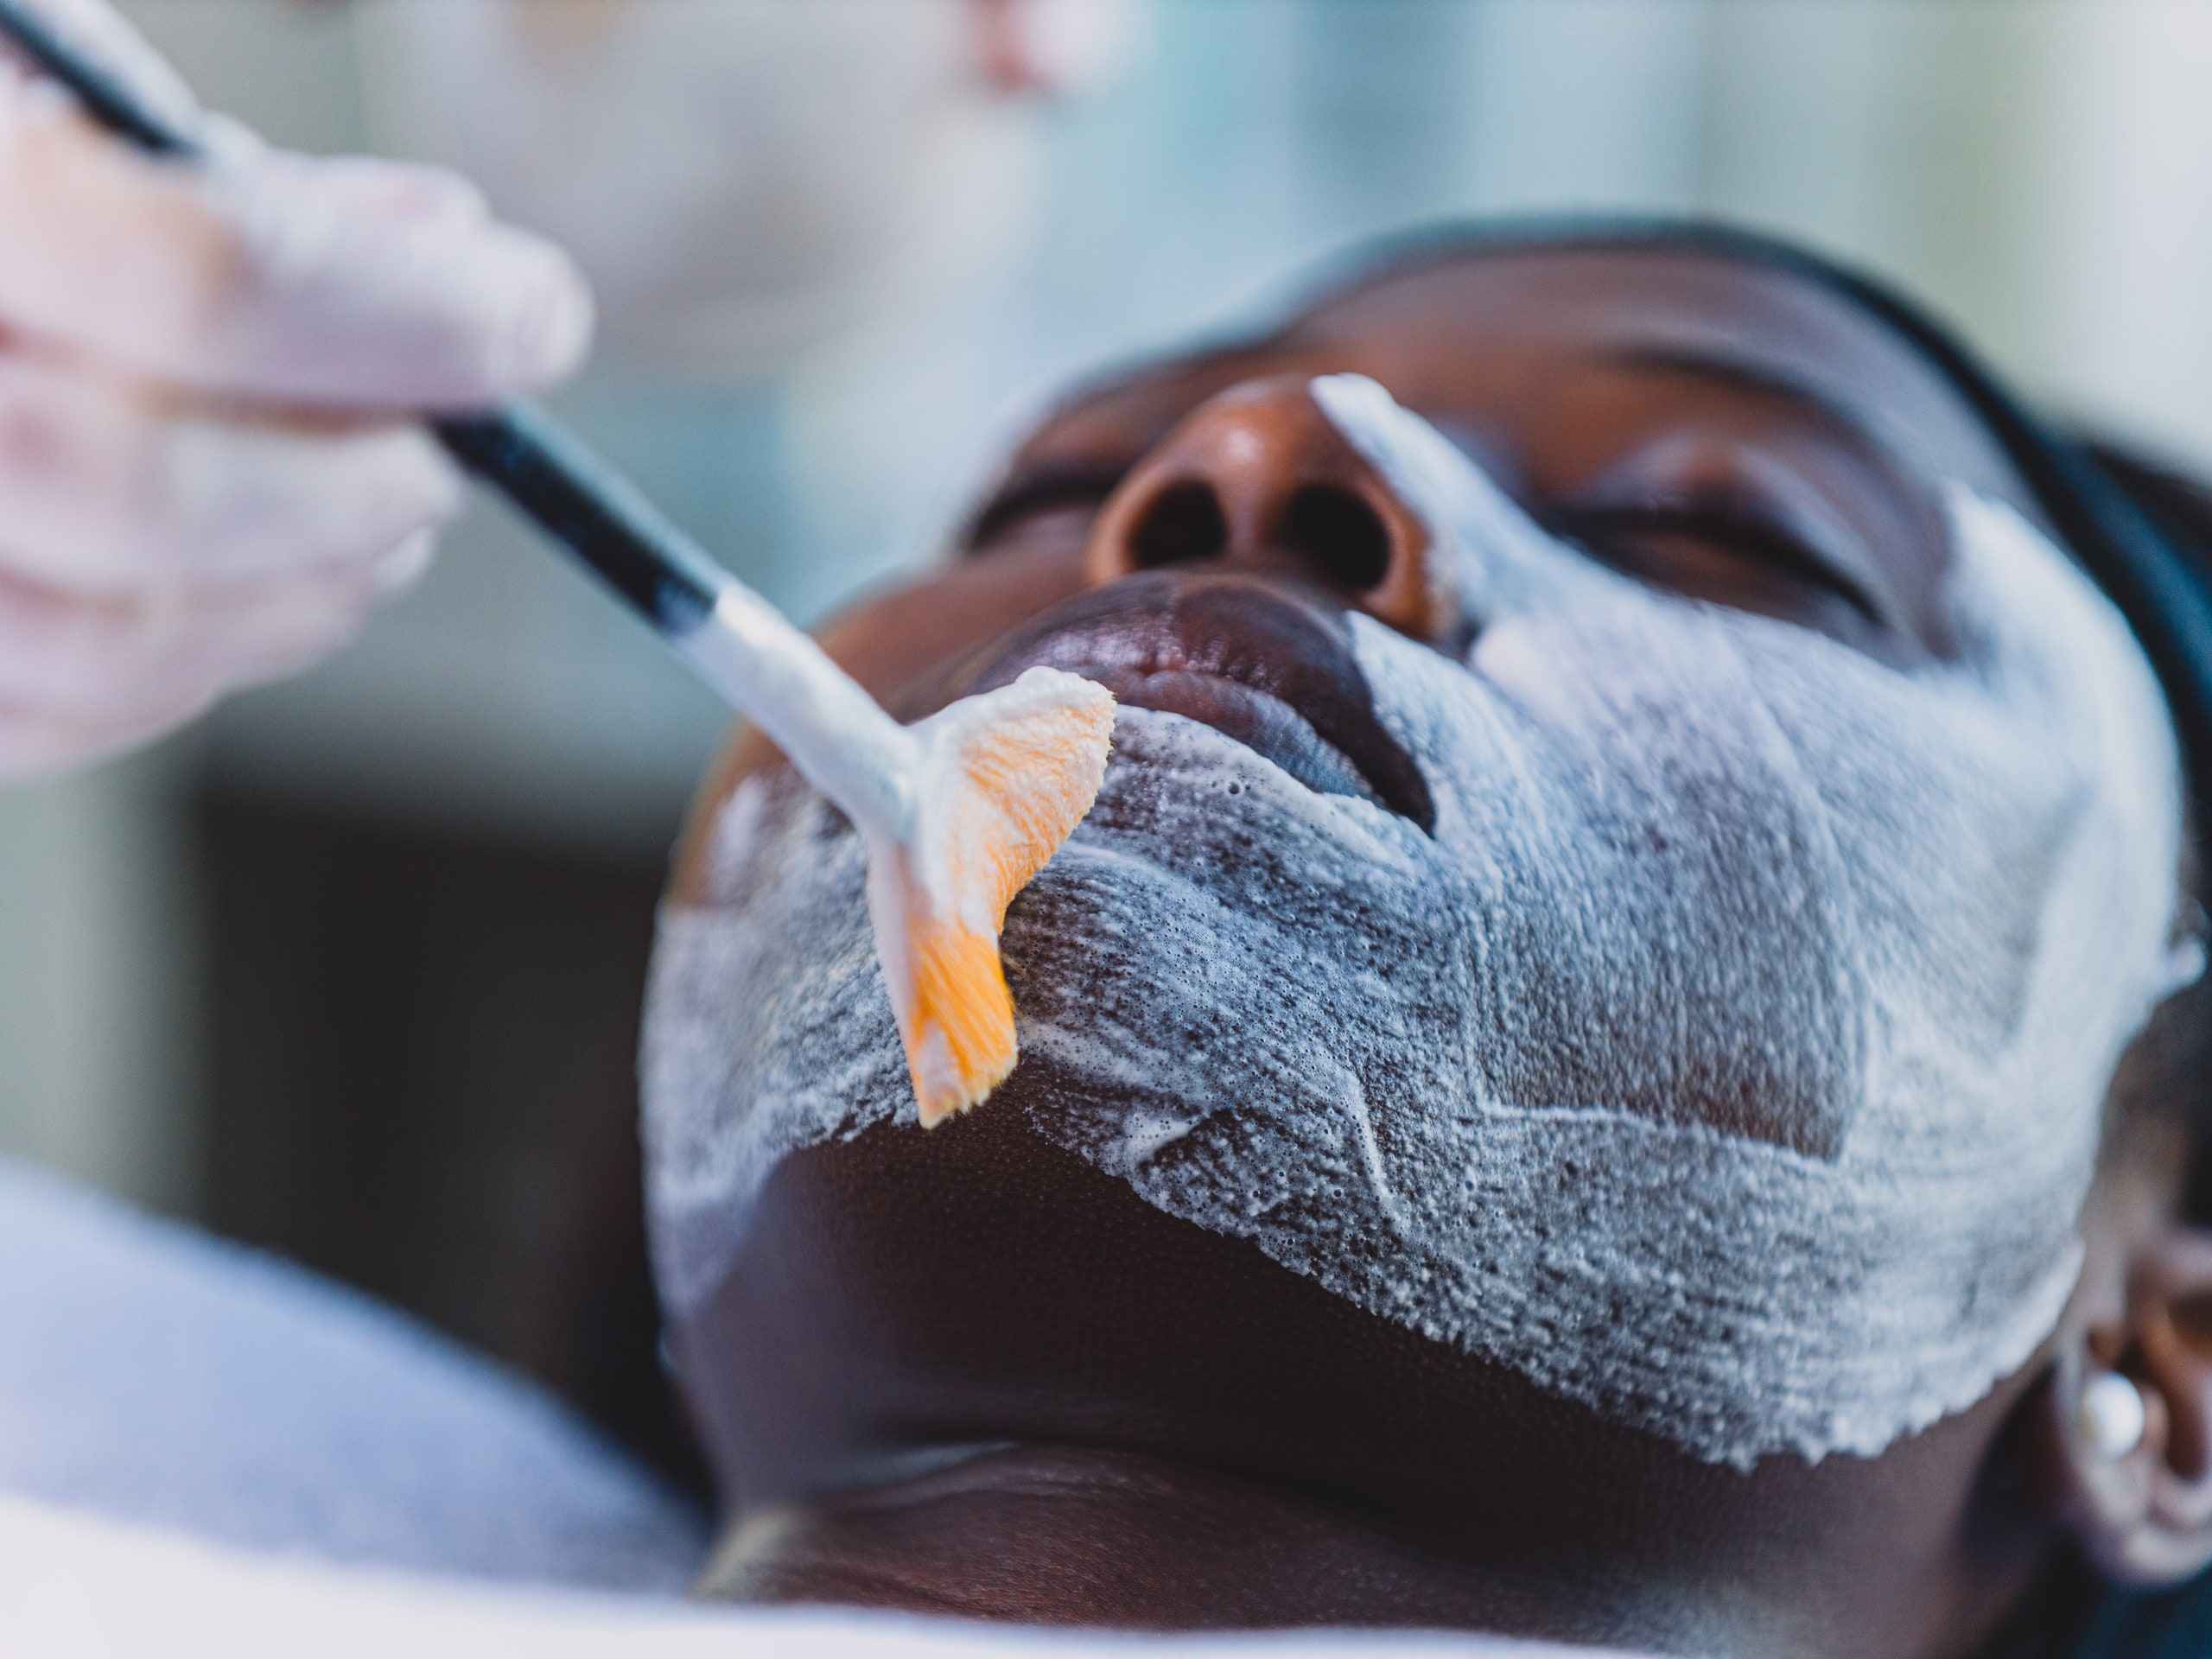 10 Things You Should Know Before Getting a Glycolic Acid Peel